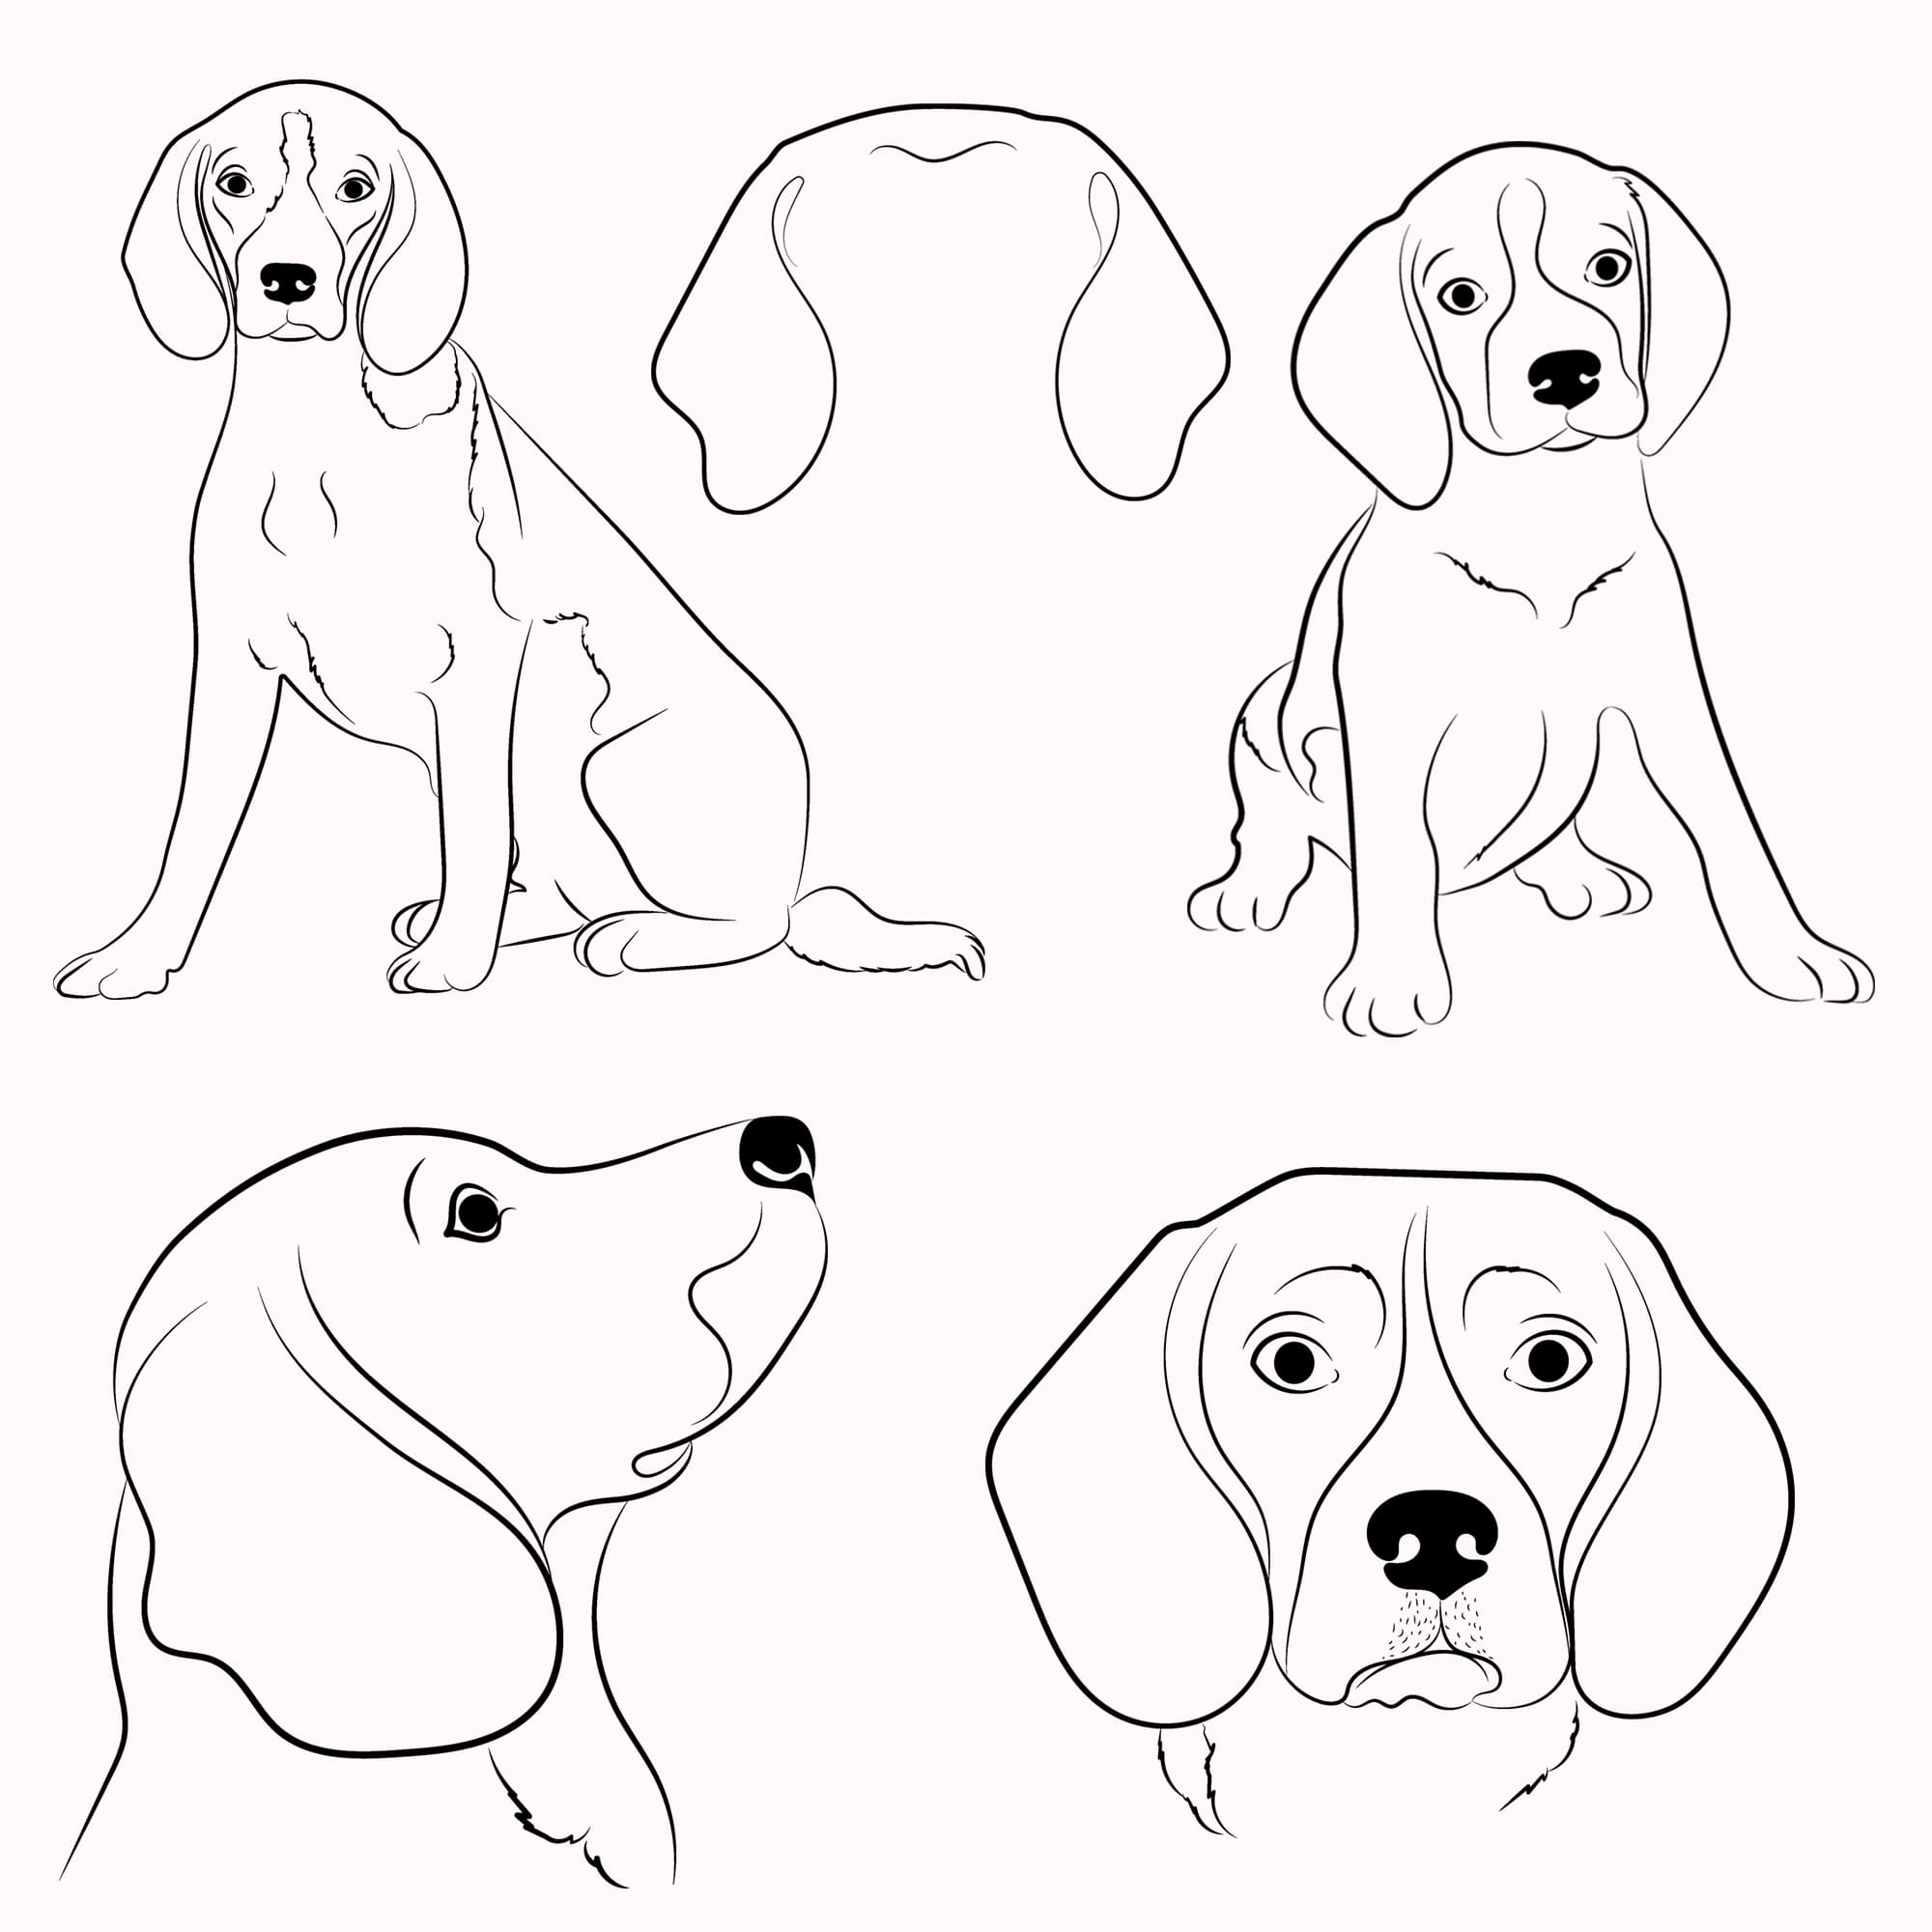 Set of four dogs with different expressions.